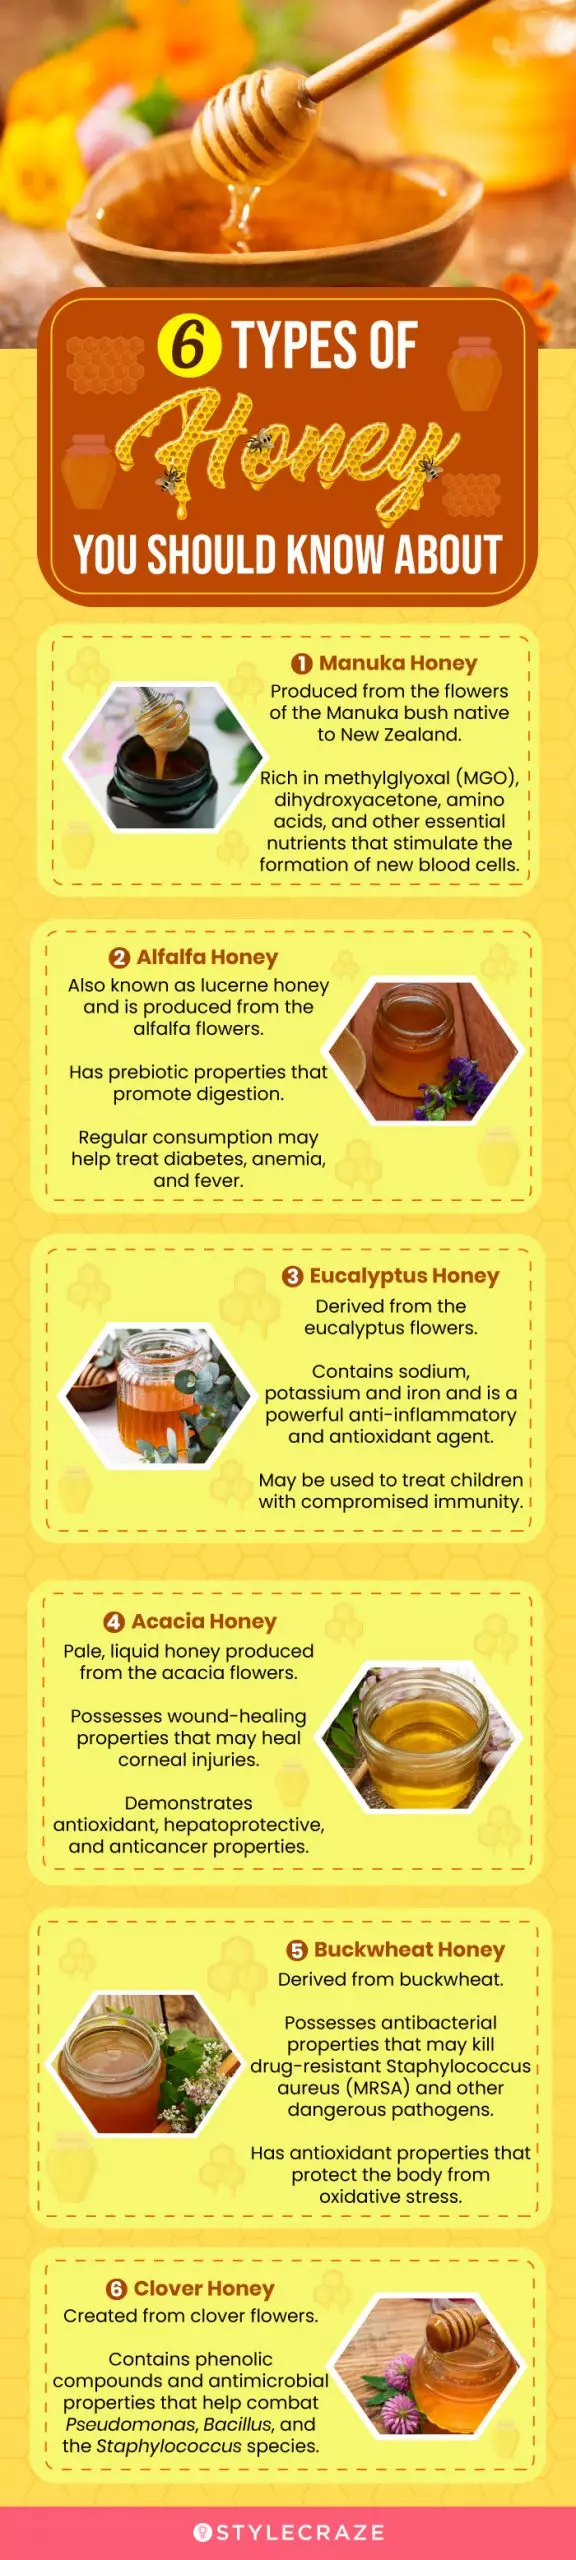 6 types of honey you should know about (infographic)